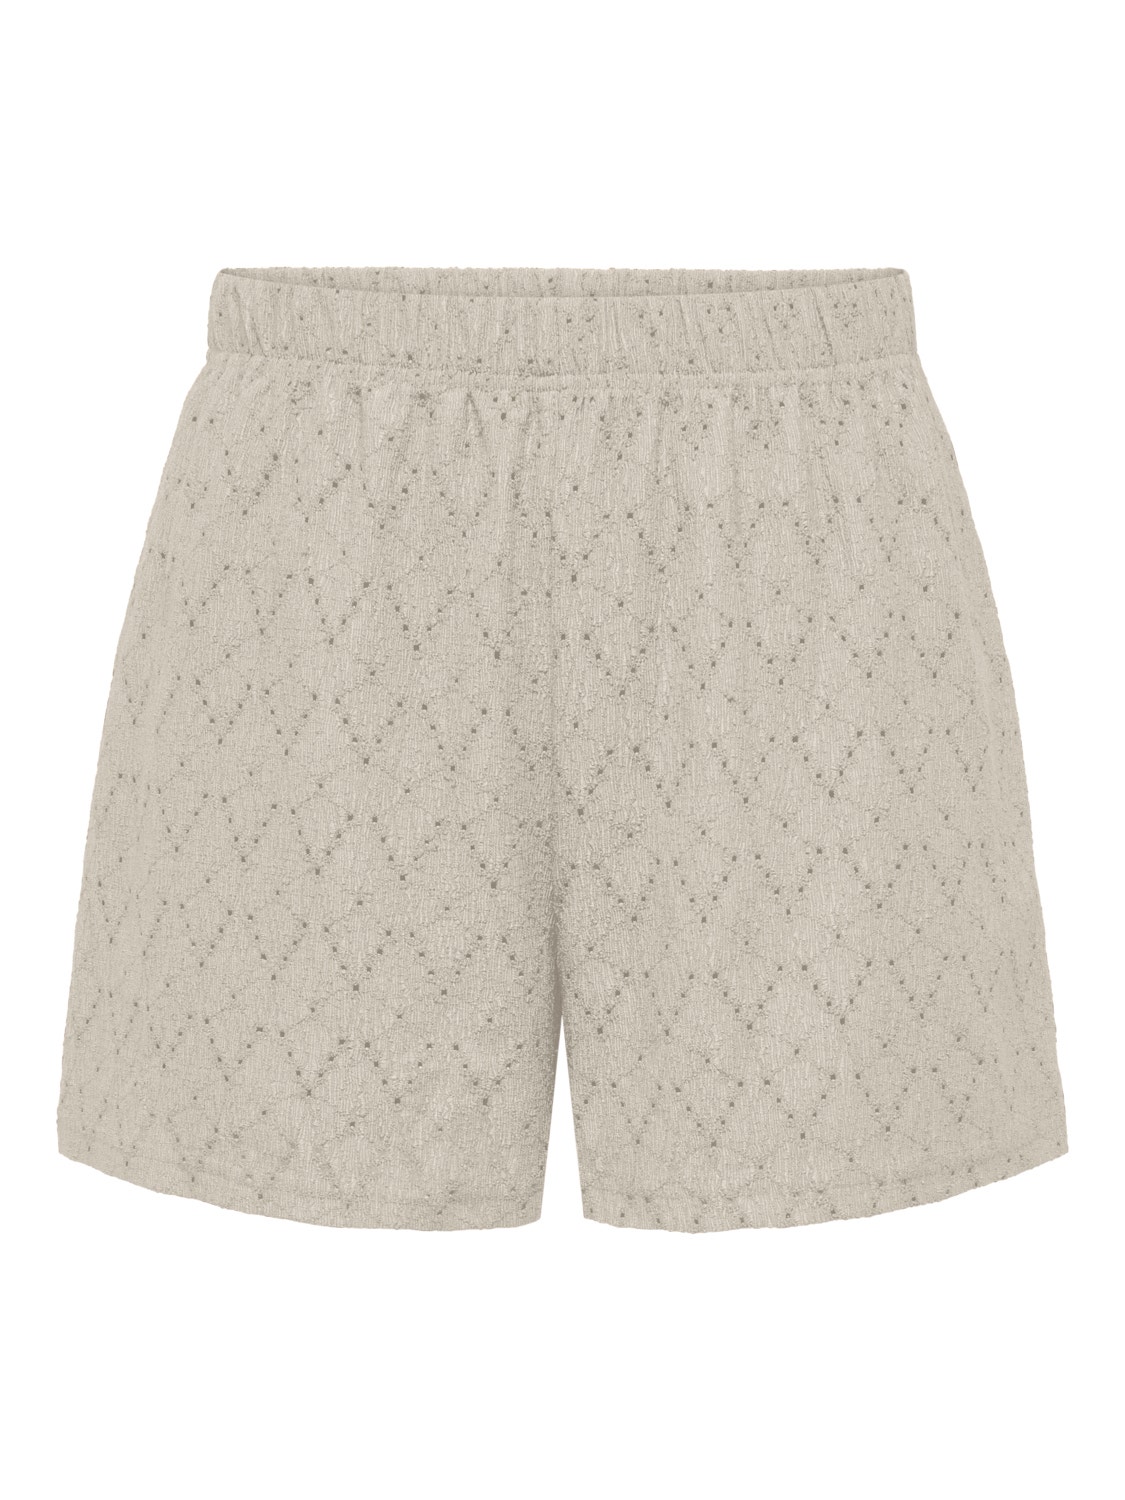 ONLY Normal geschnitten Mittlere Taille Shorts -Pumice Stone - 15294178